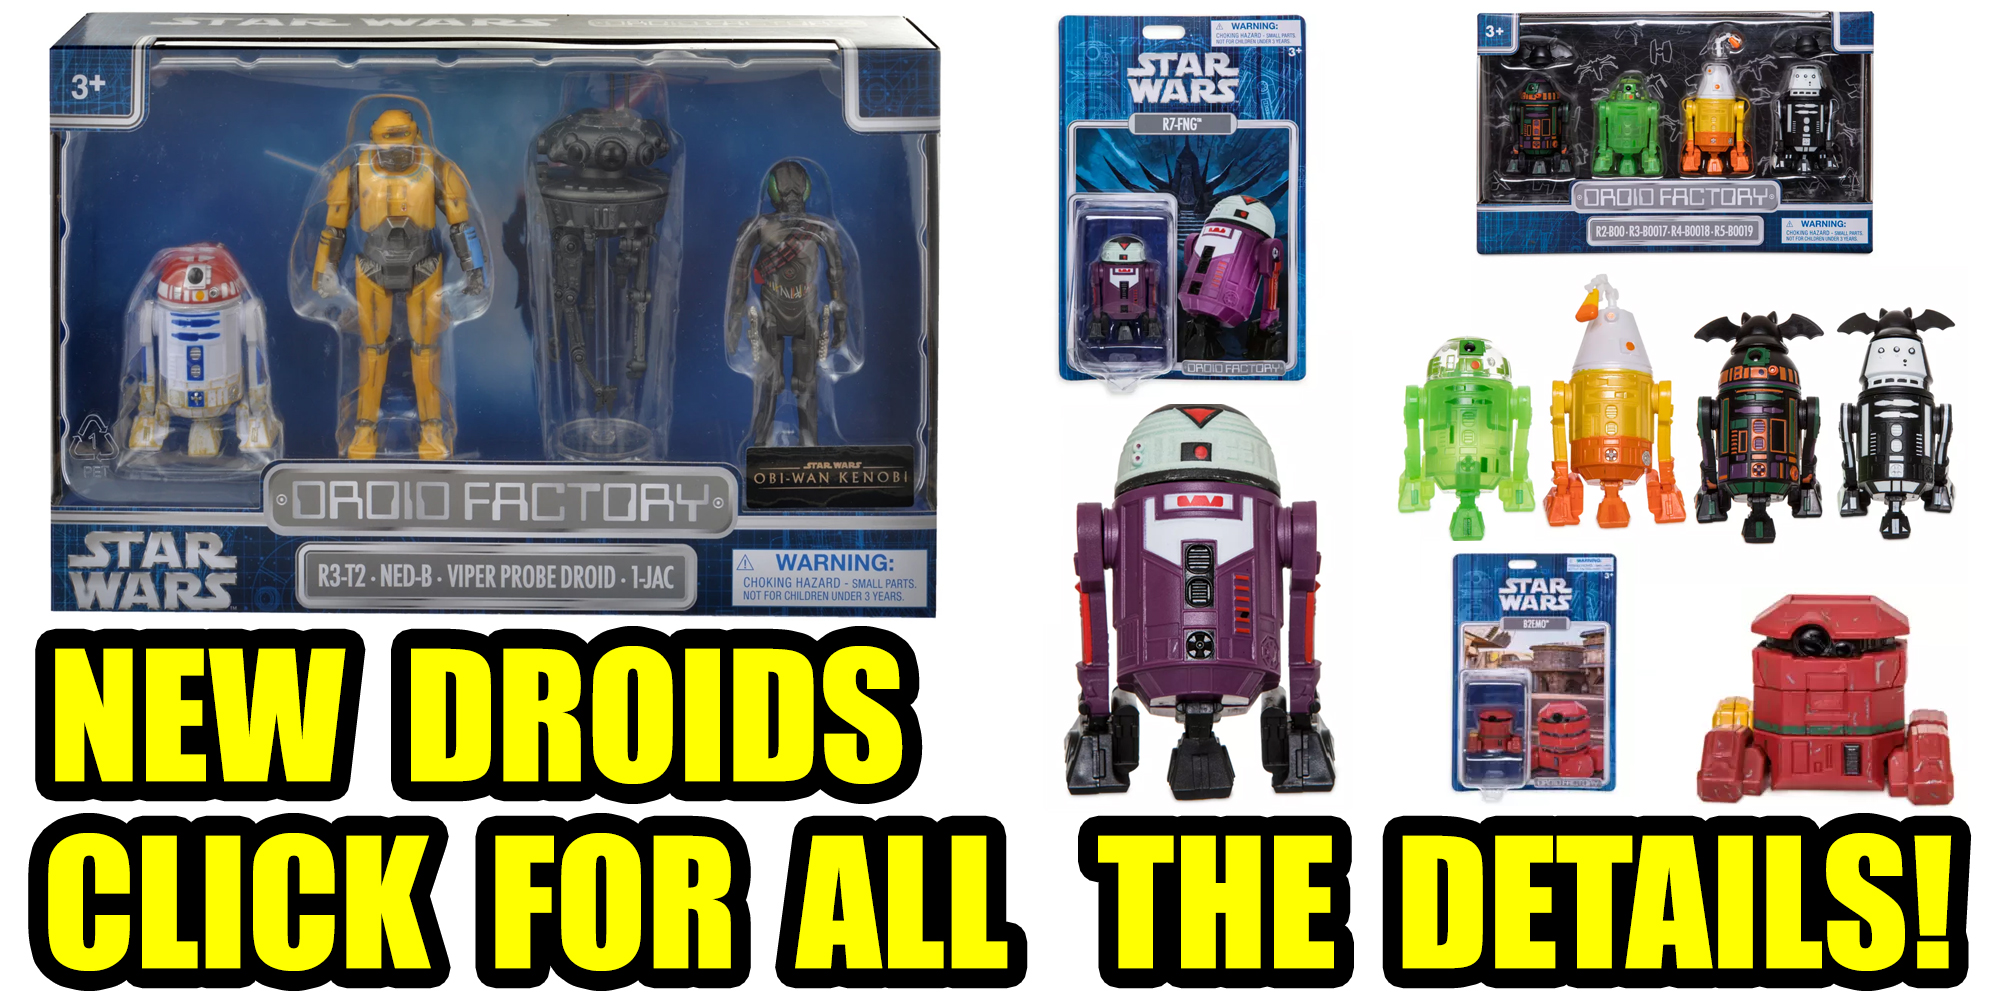 Newly Announced 3 3/4" Disney Droid Factory Droids - All The Info!